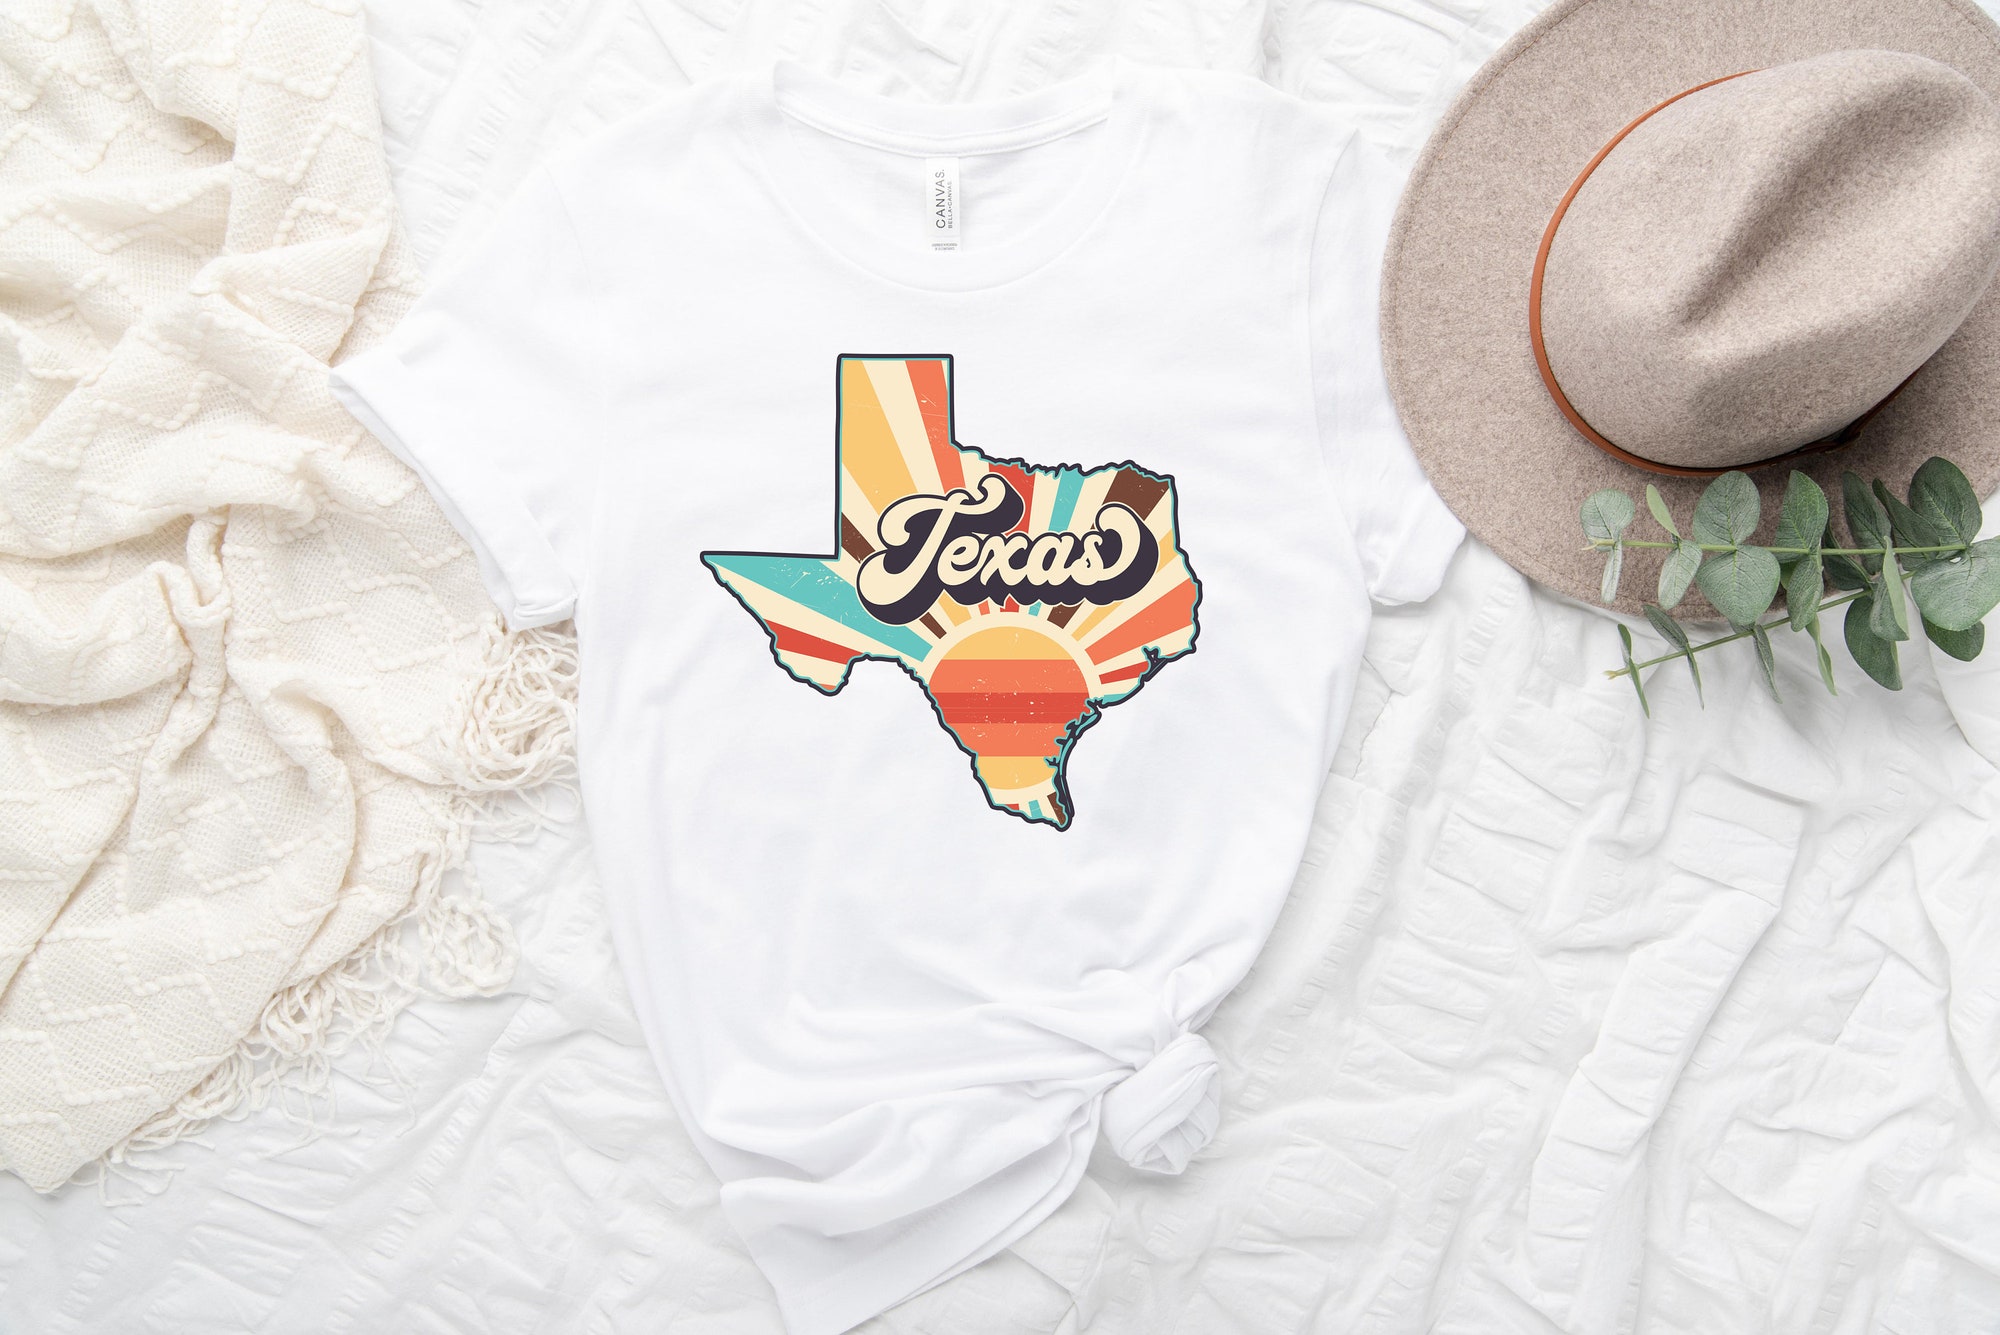 Discover Vintage Texas Shirt, Texas Fan Shirt, Vintage T Shirt, Texas Pride, College Student Gifts, State Shirts, Texas T-Shirt, Texas Cities Shirt